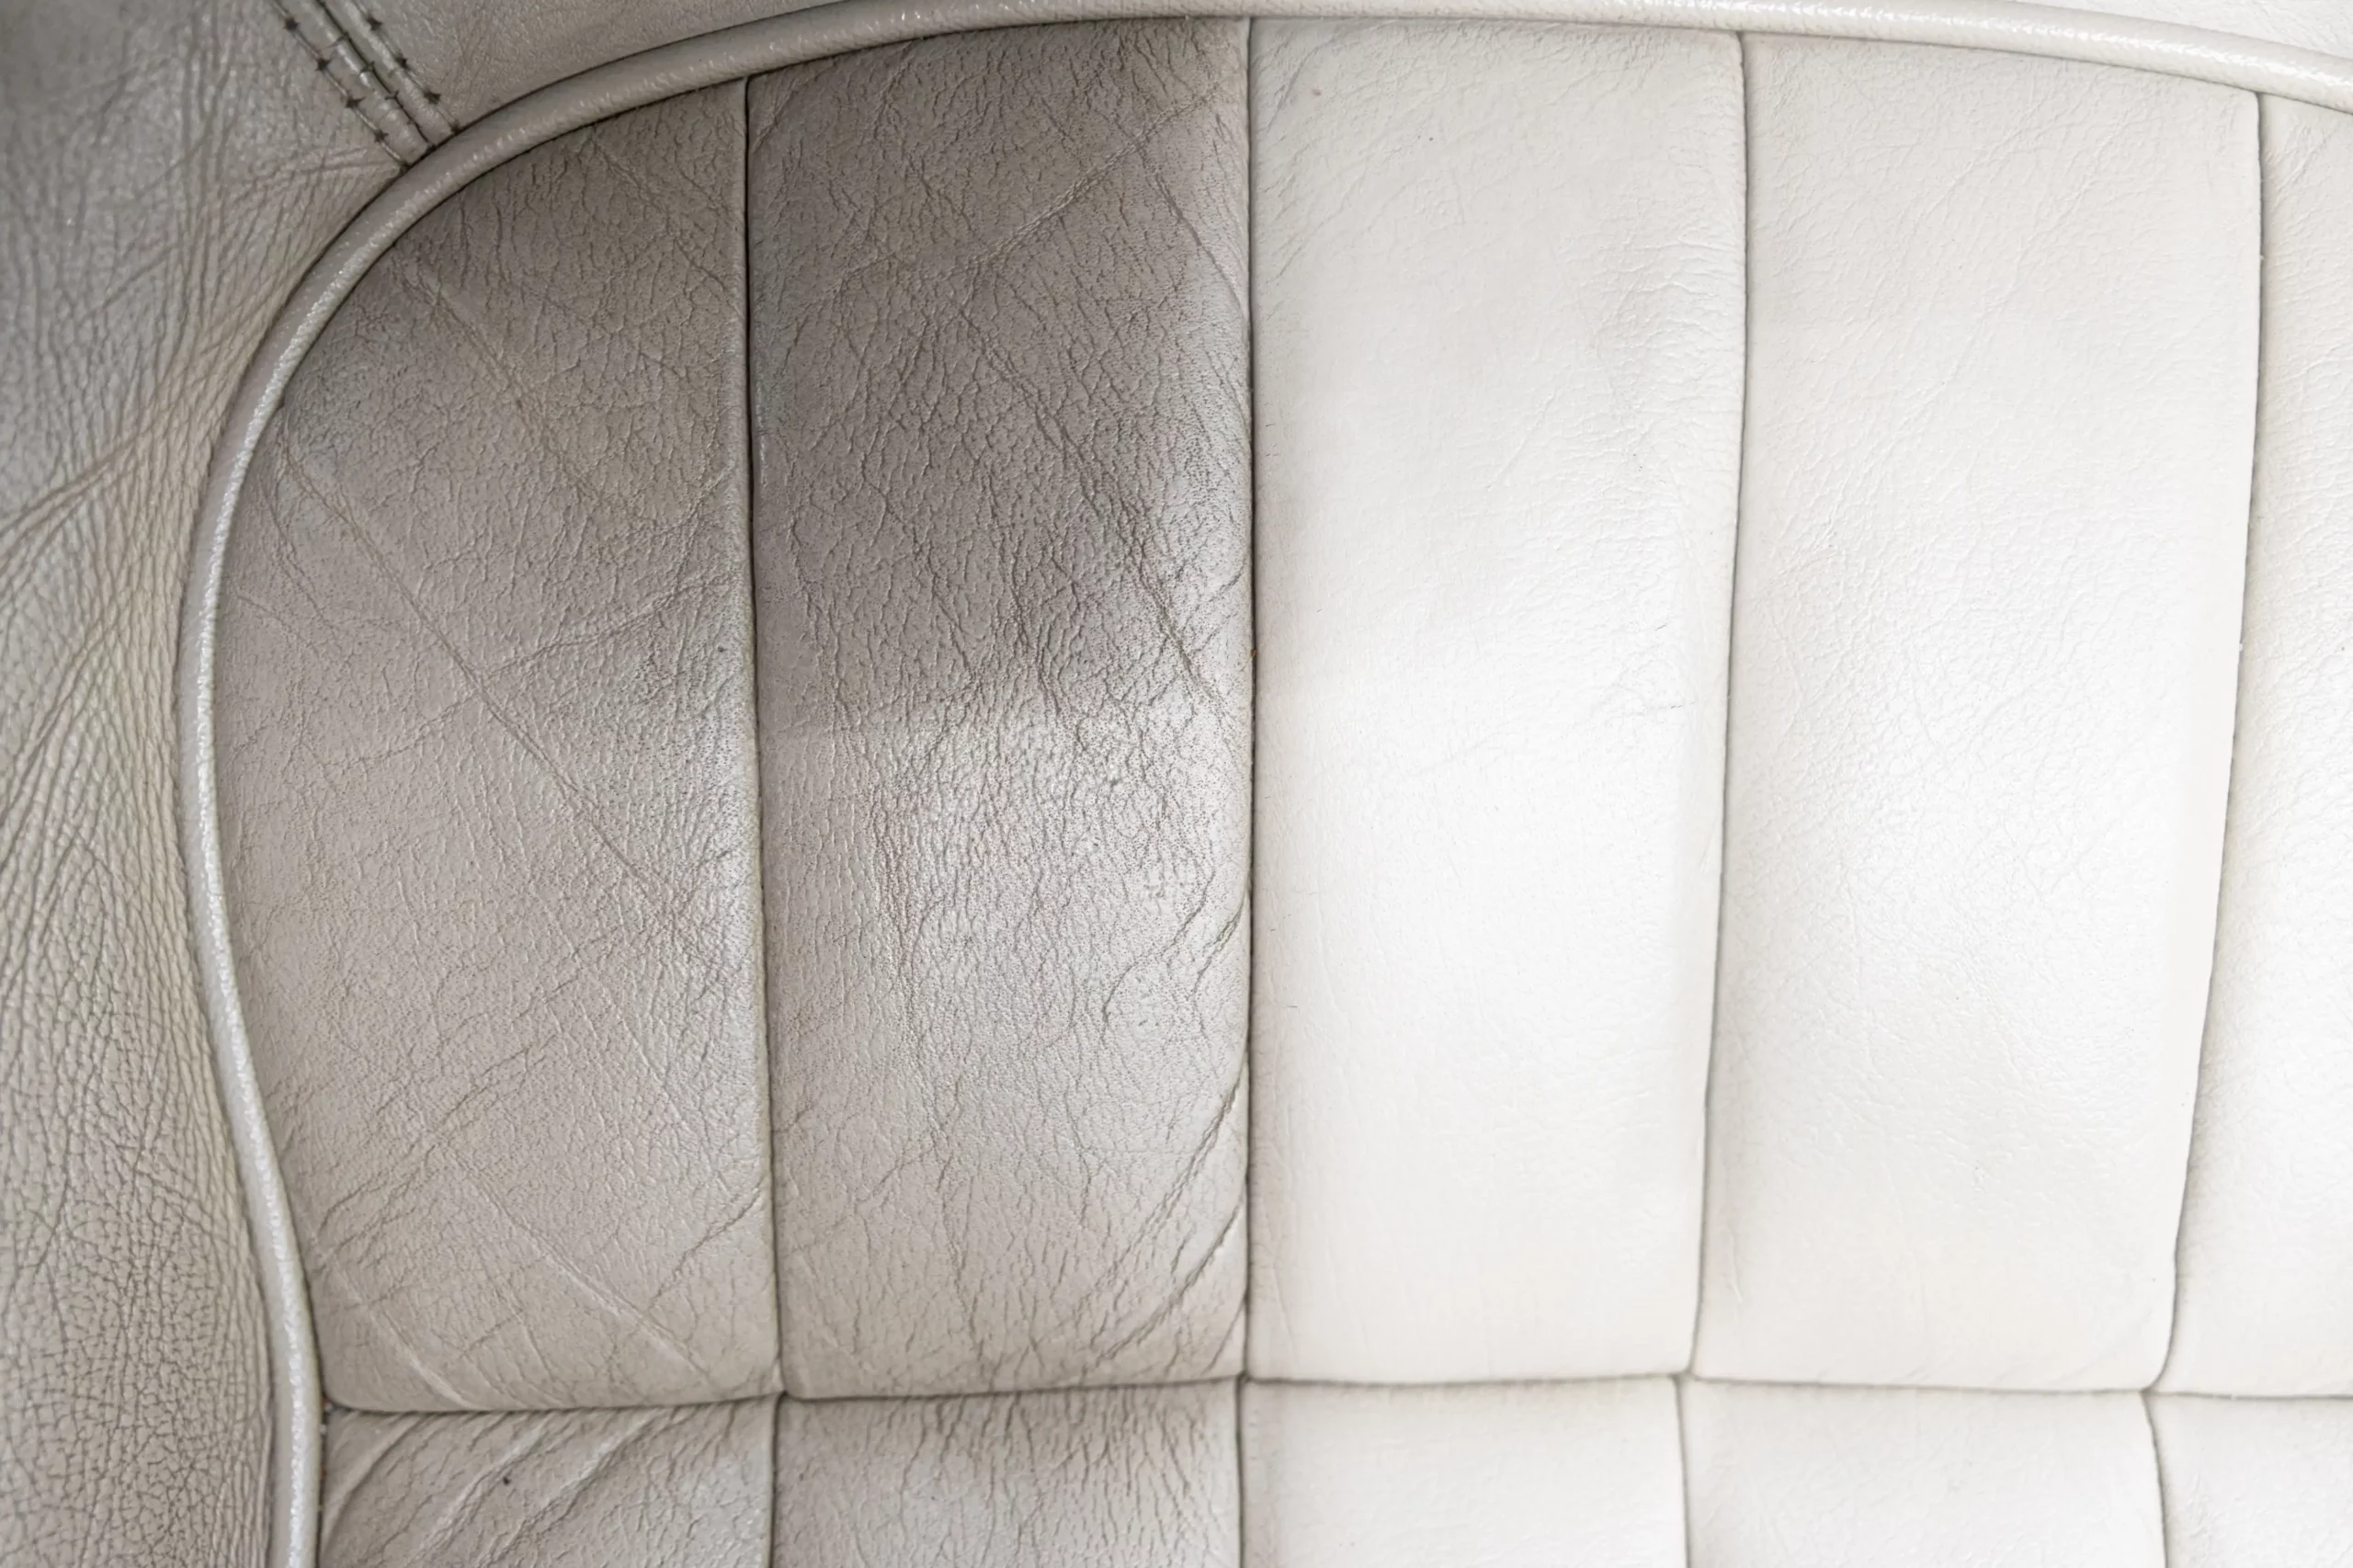 Before and after picture of a discolored white leather car seat.